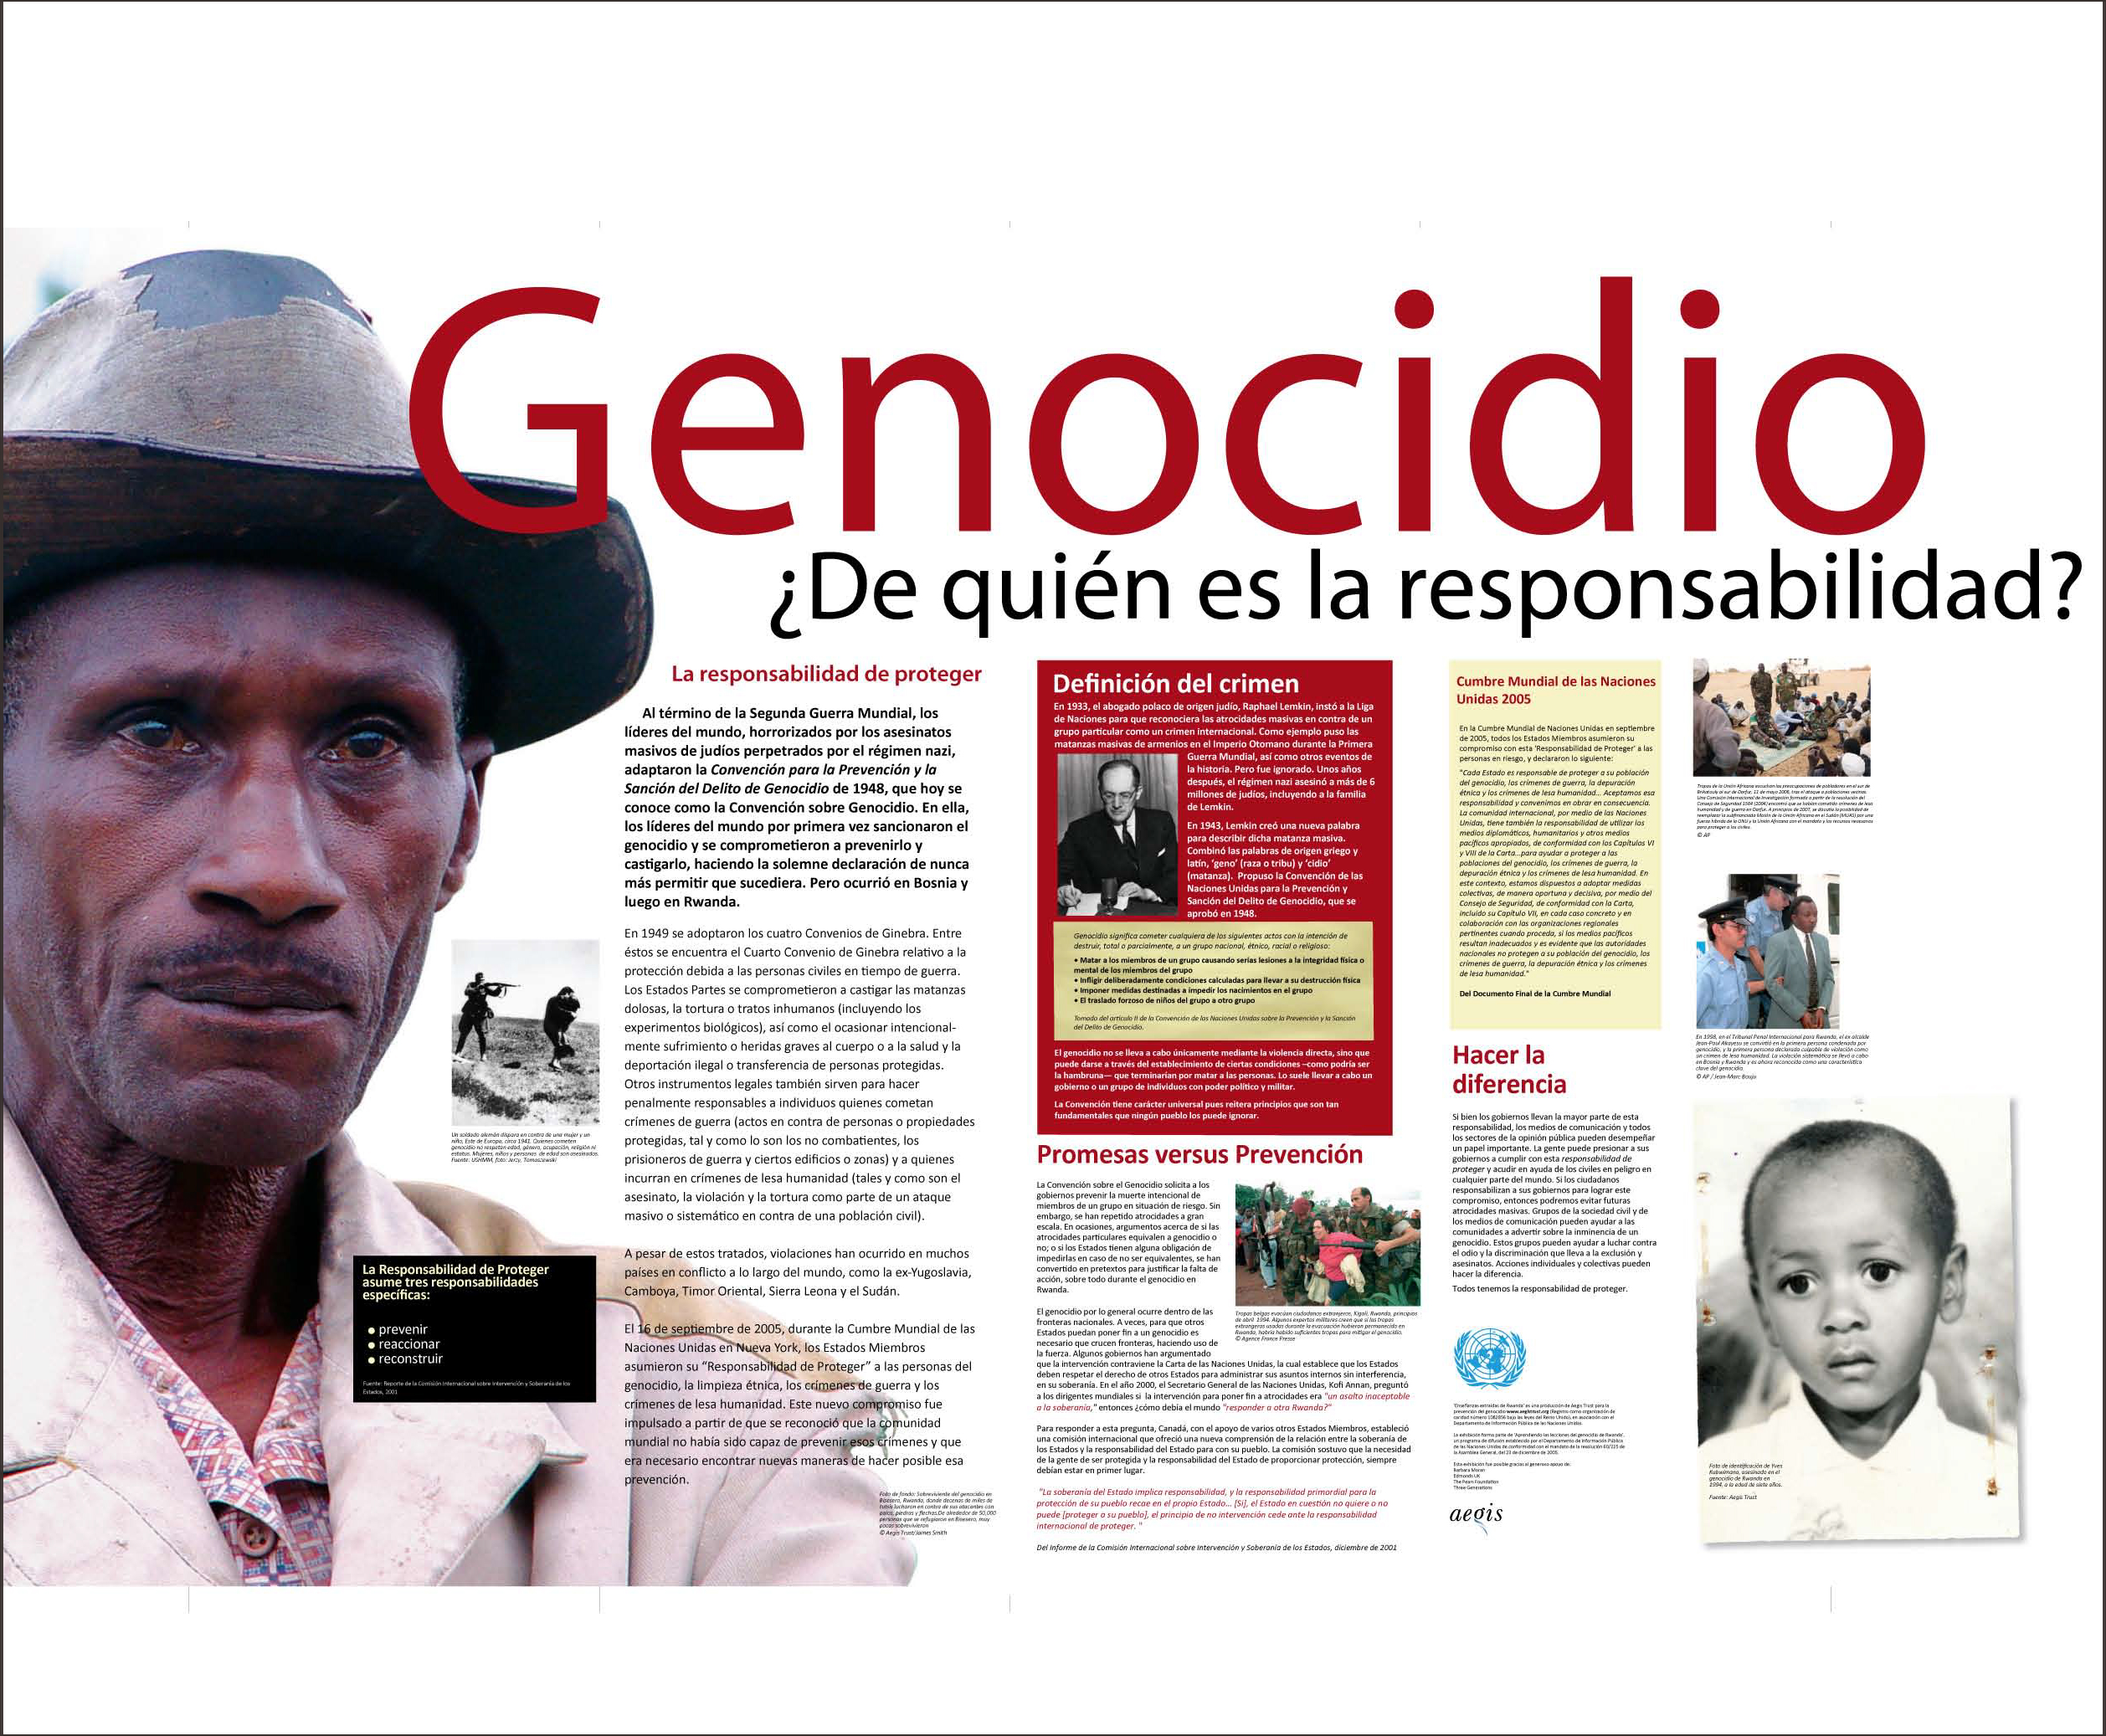 large scale poster titled: Genocide - Whose responsibility?